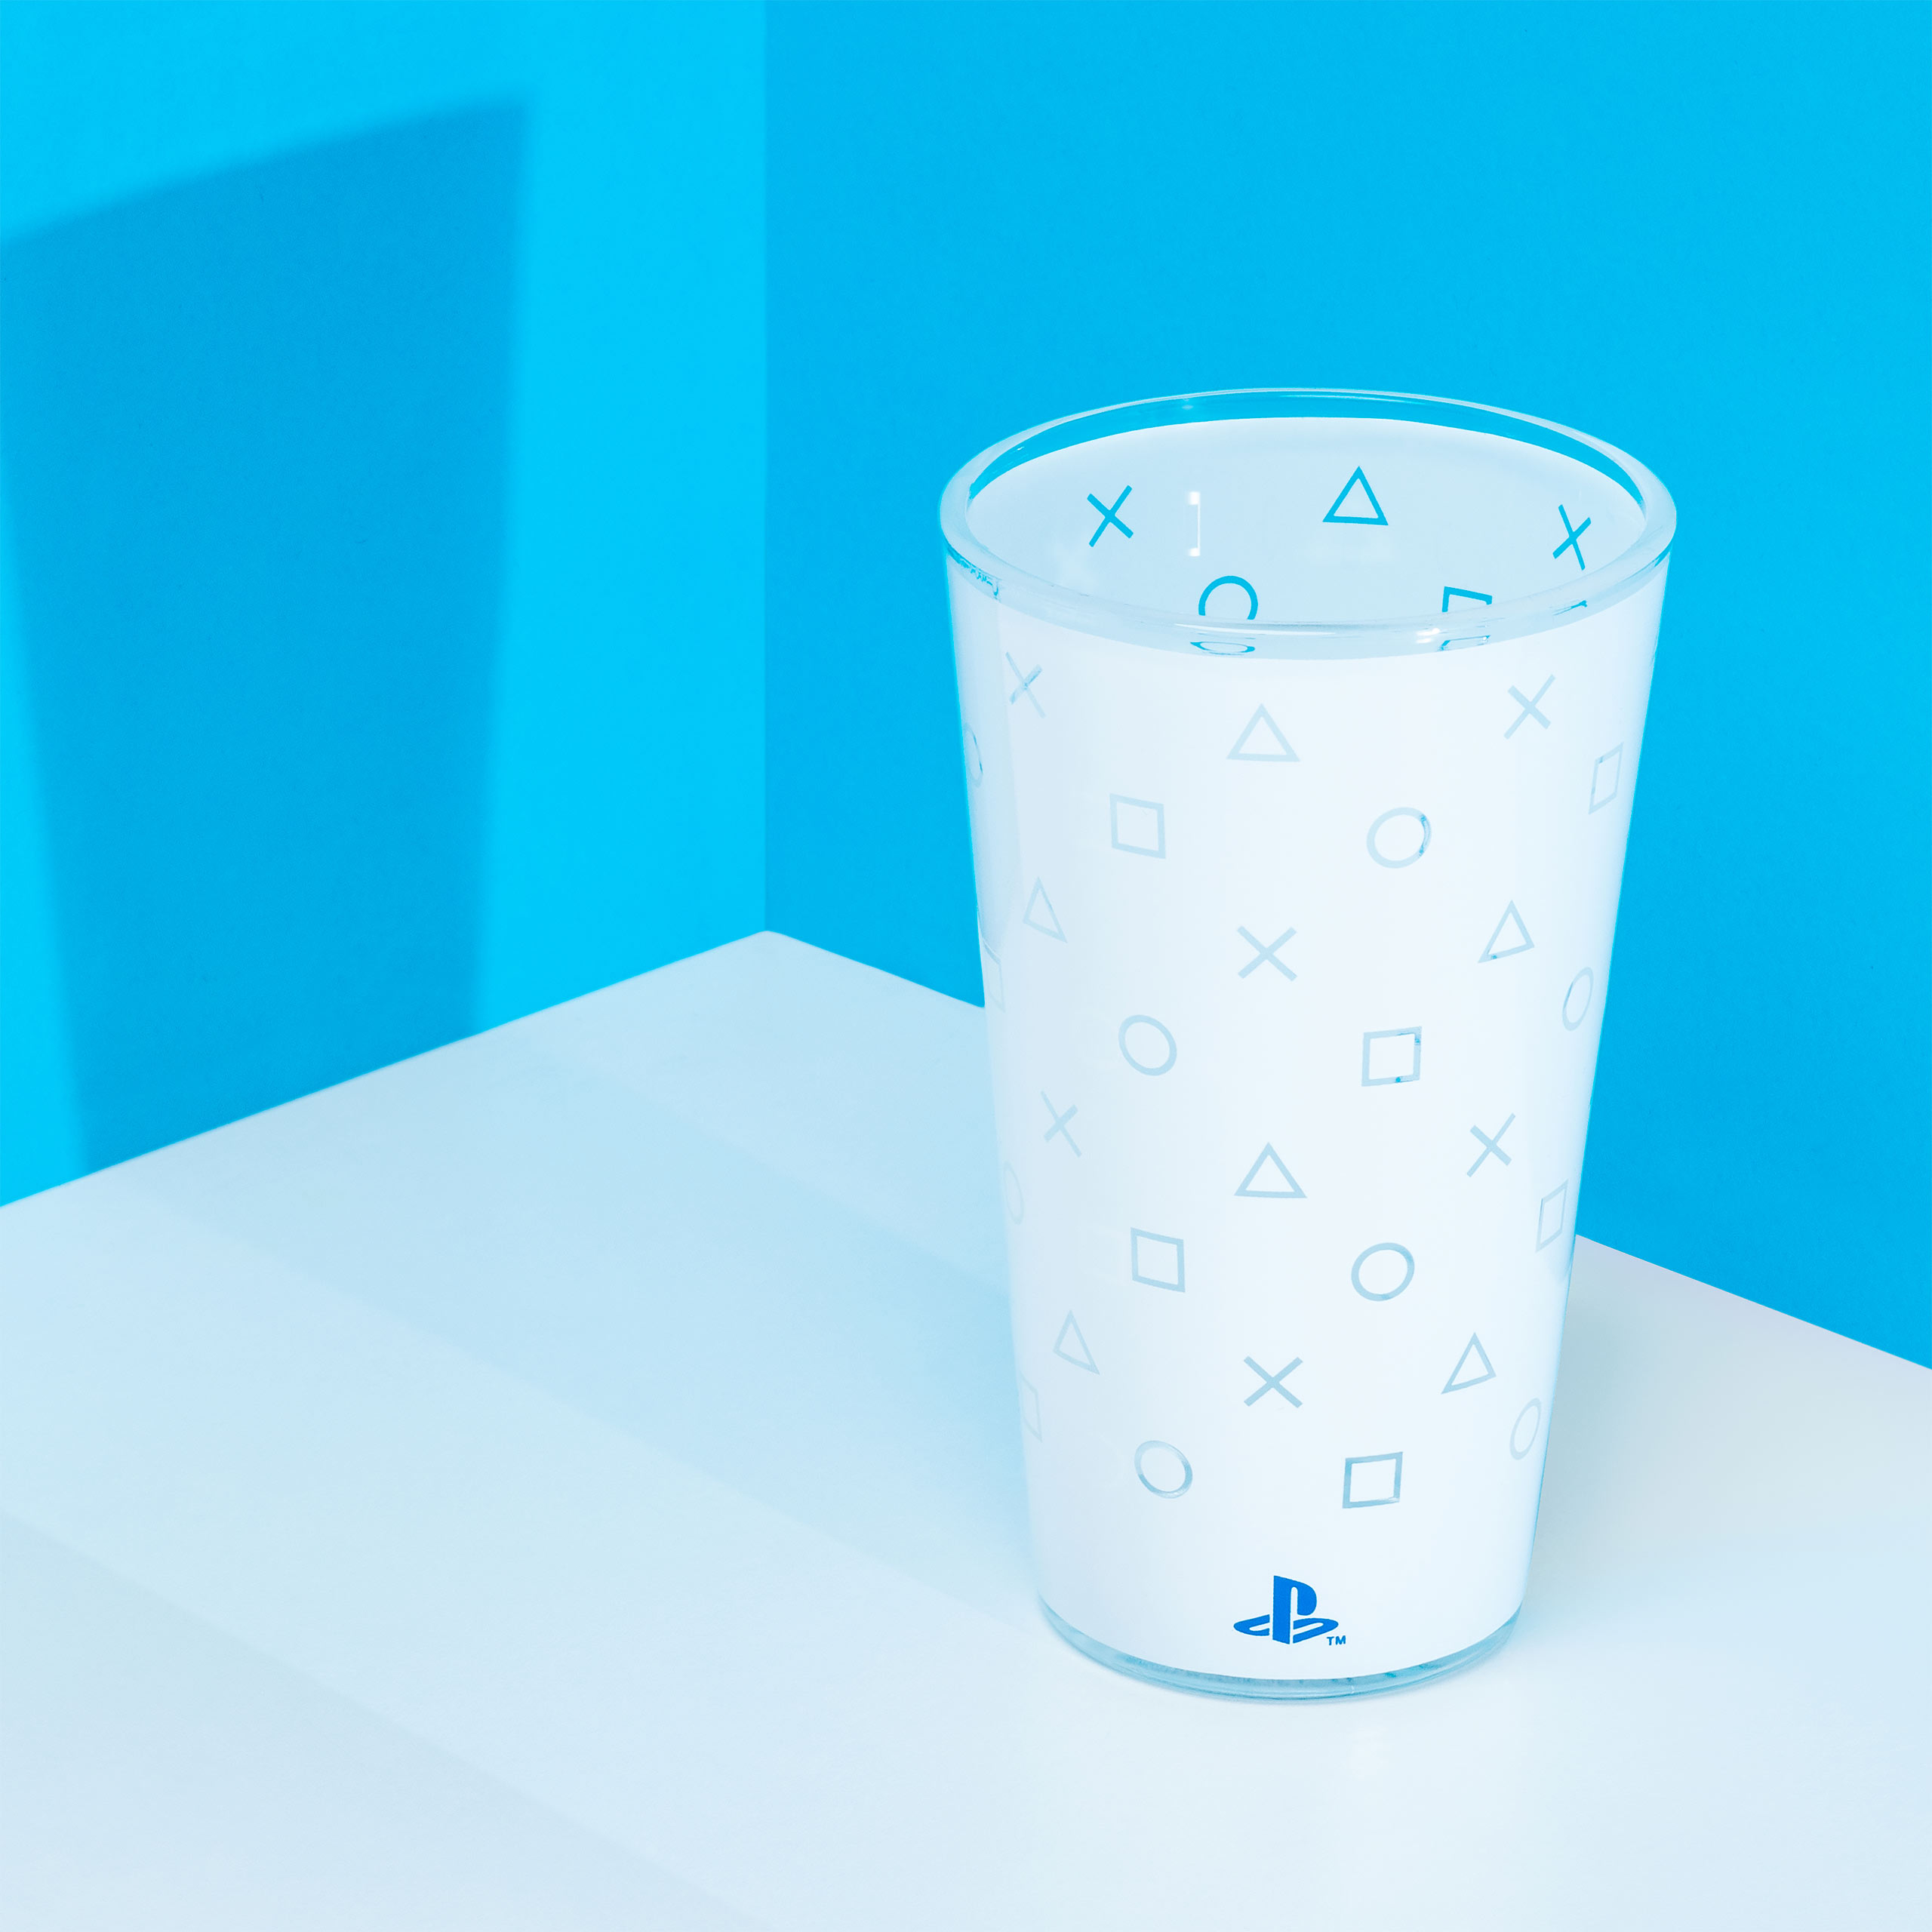 PlayStation - PS5 Buttons Glass